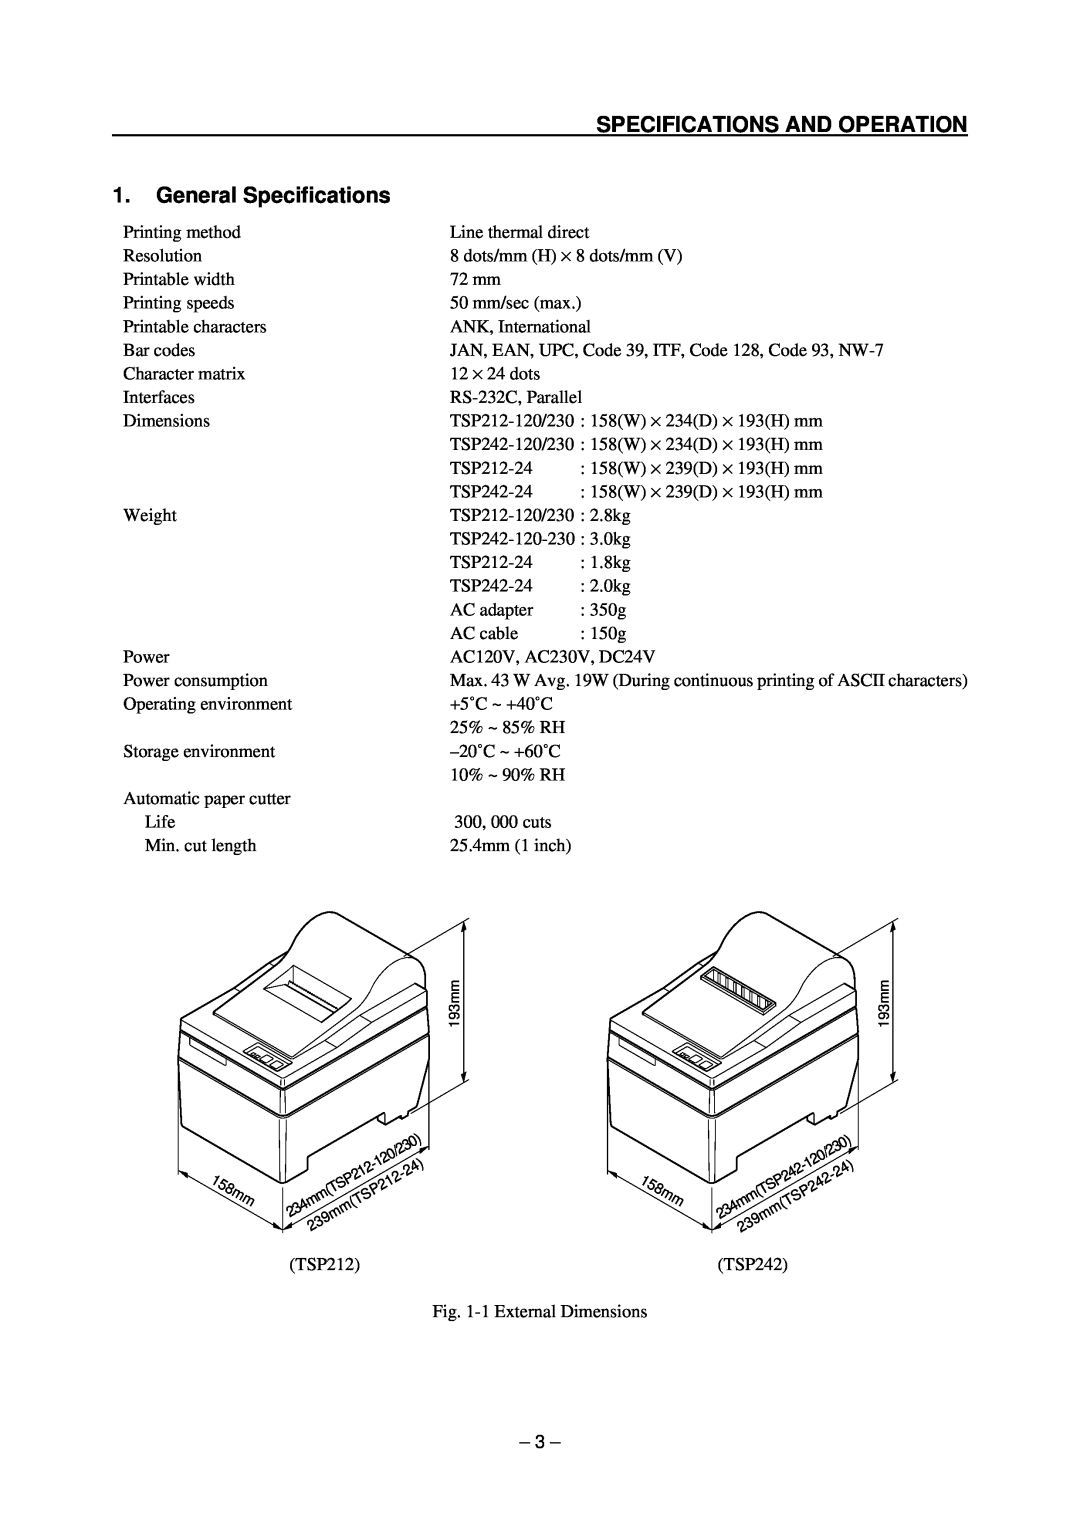 Star Micronics TSP200 technical manual SPECIFICATIONS AND OPERATION 1. General Specifications, 158mm 